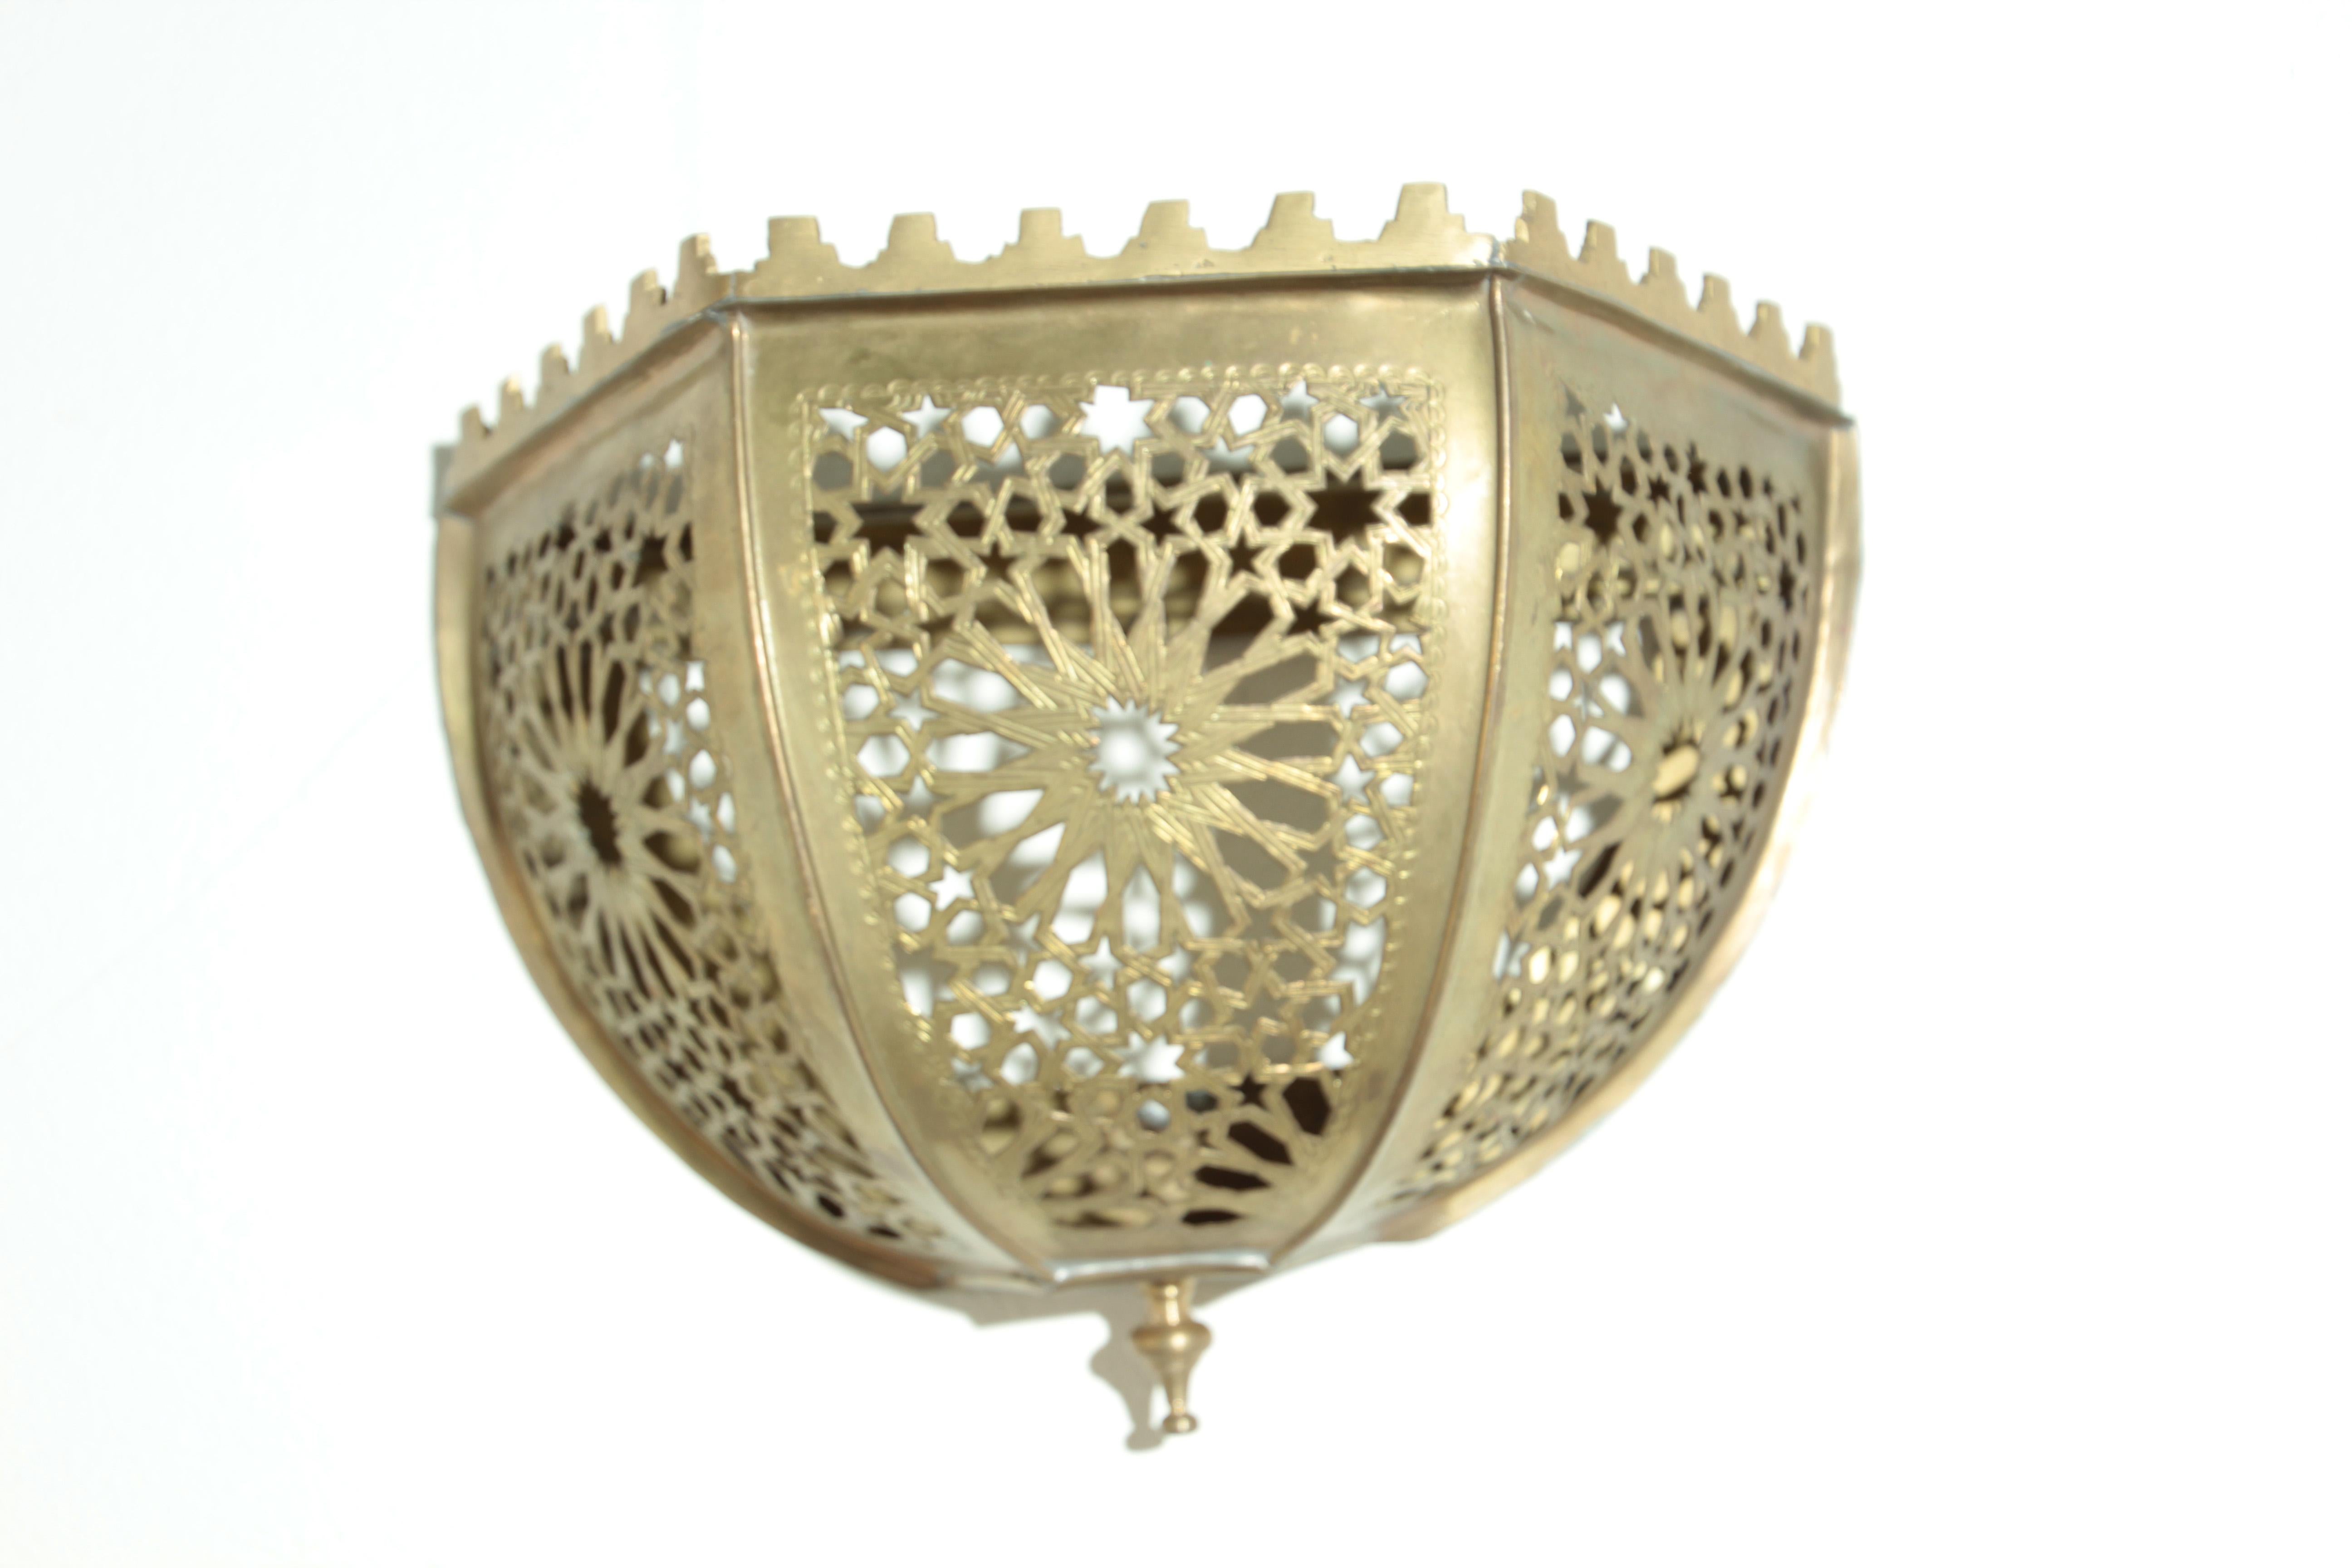 Moroccan brass handcrafted Art piece could be used as wall lamp shade.
Brass frame perfect for soft subtle sconce light.
There are no electrics within the lampshade.
They will look great over an electric fitting or just as a Moroccan Art wall